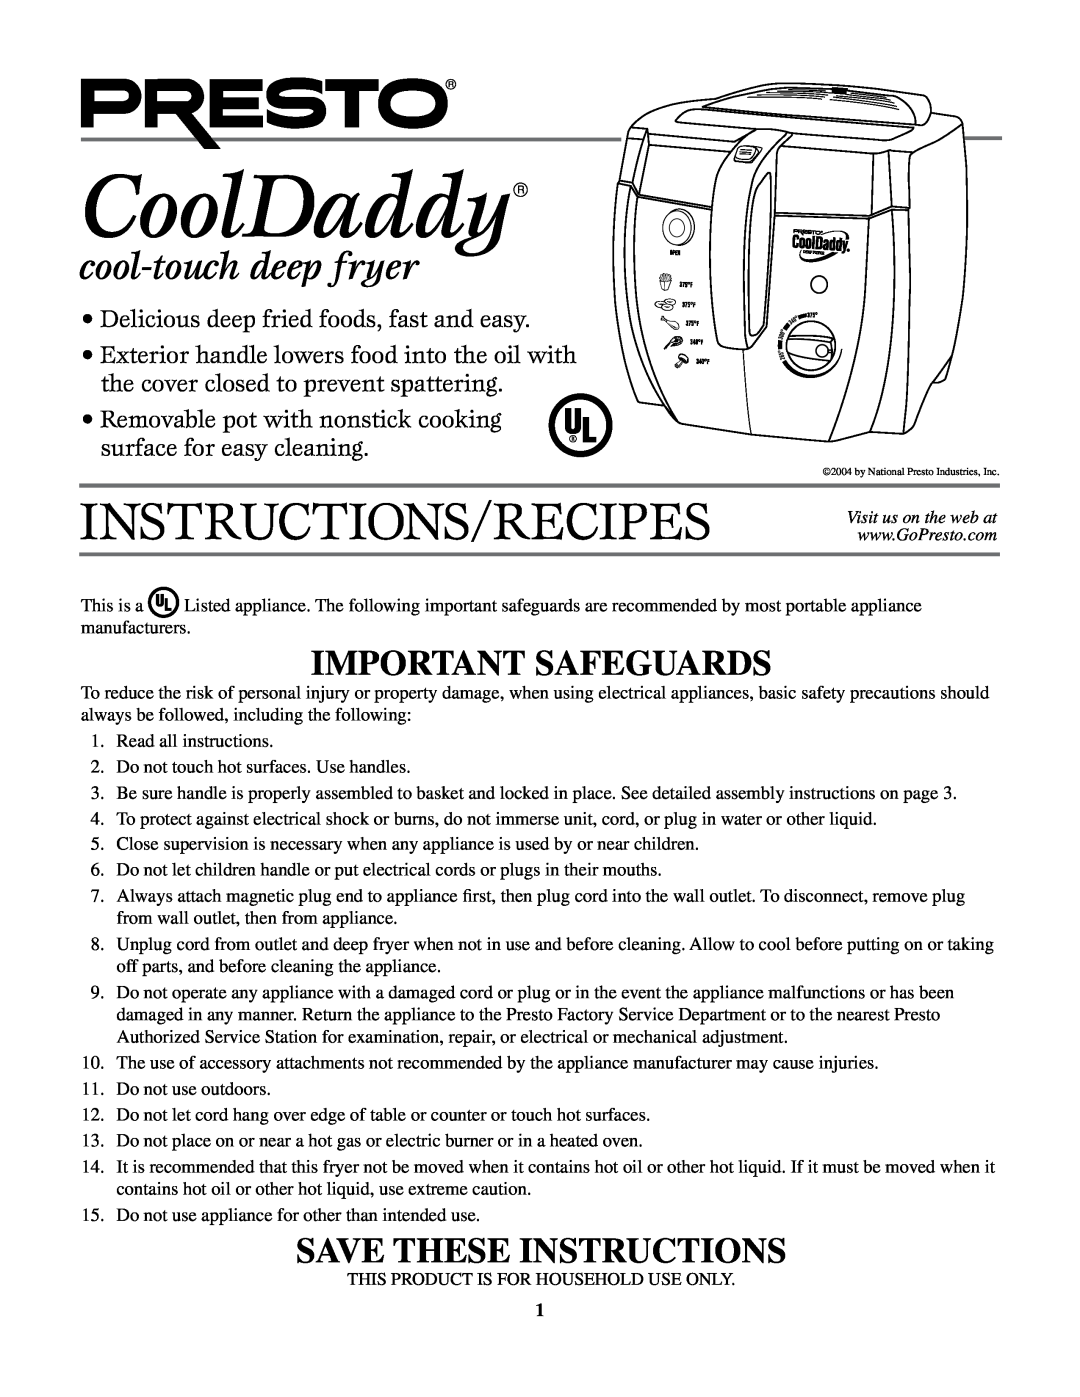 Presto manual CoolDaddy, cool-touch deep fryer, Important Safeguards, Save These Instructions 